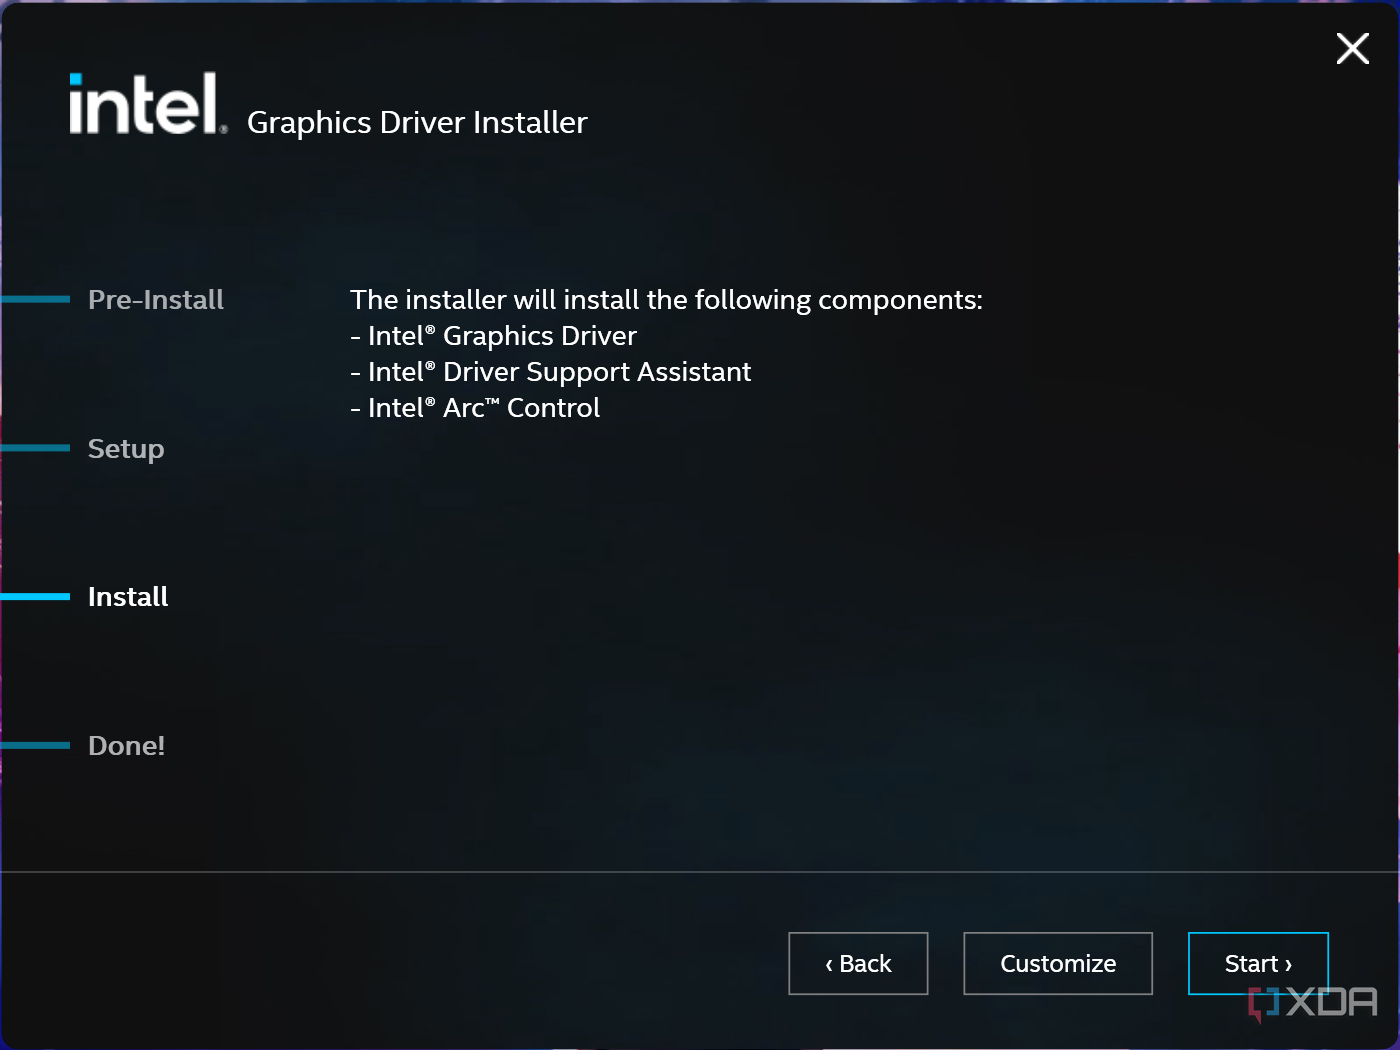 Screenshot of intel graphics driver installer showing the option to start the installation or customize it